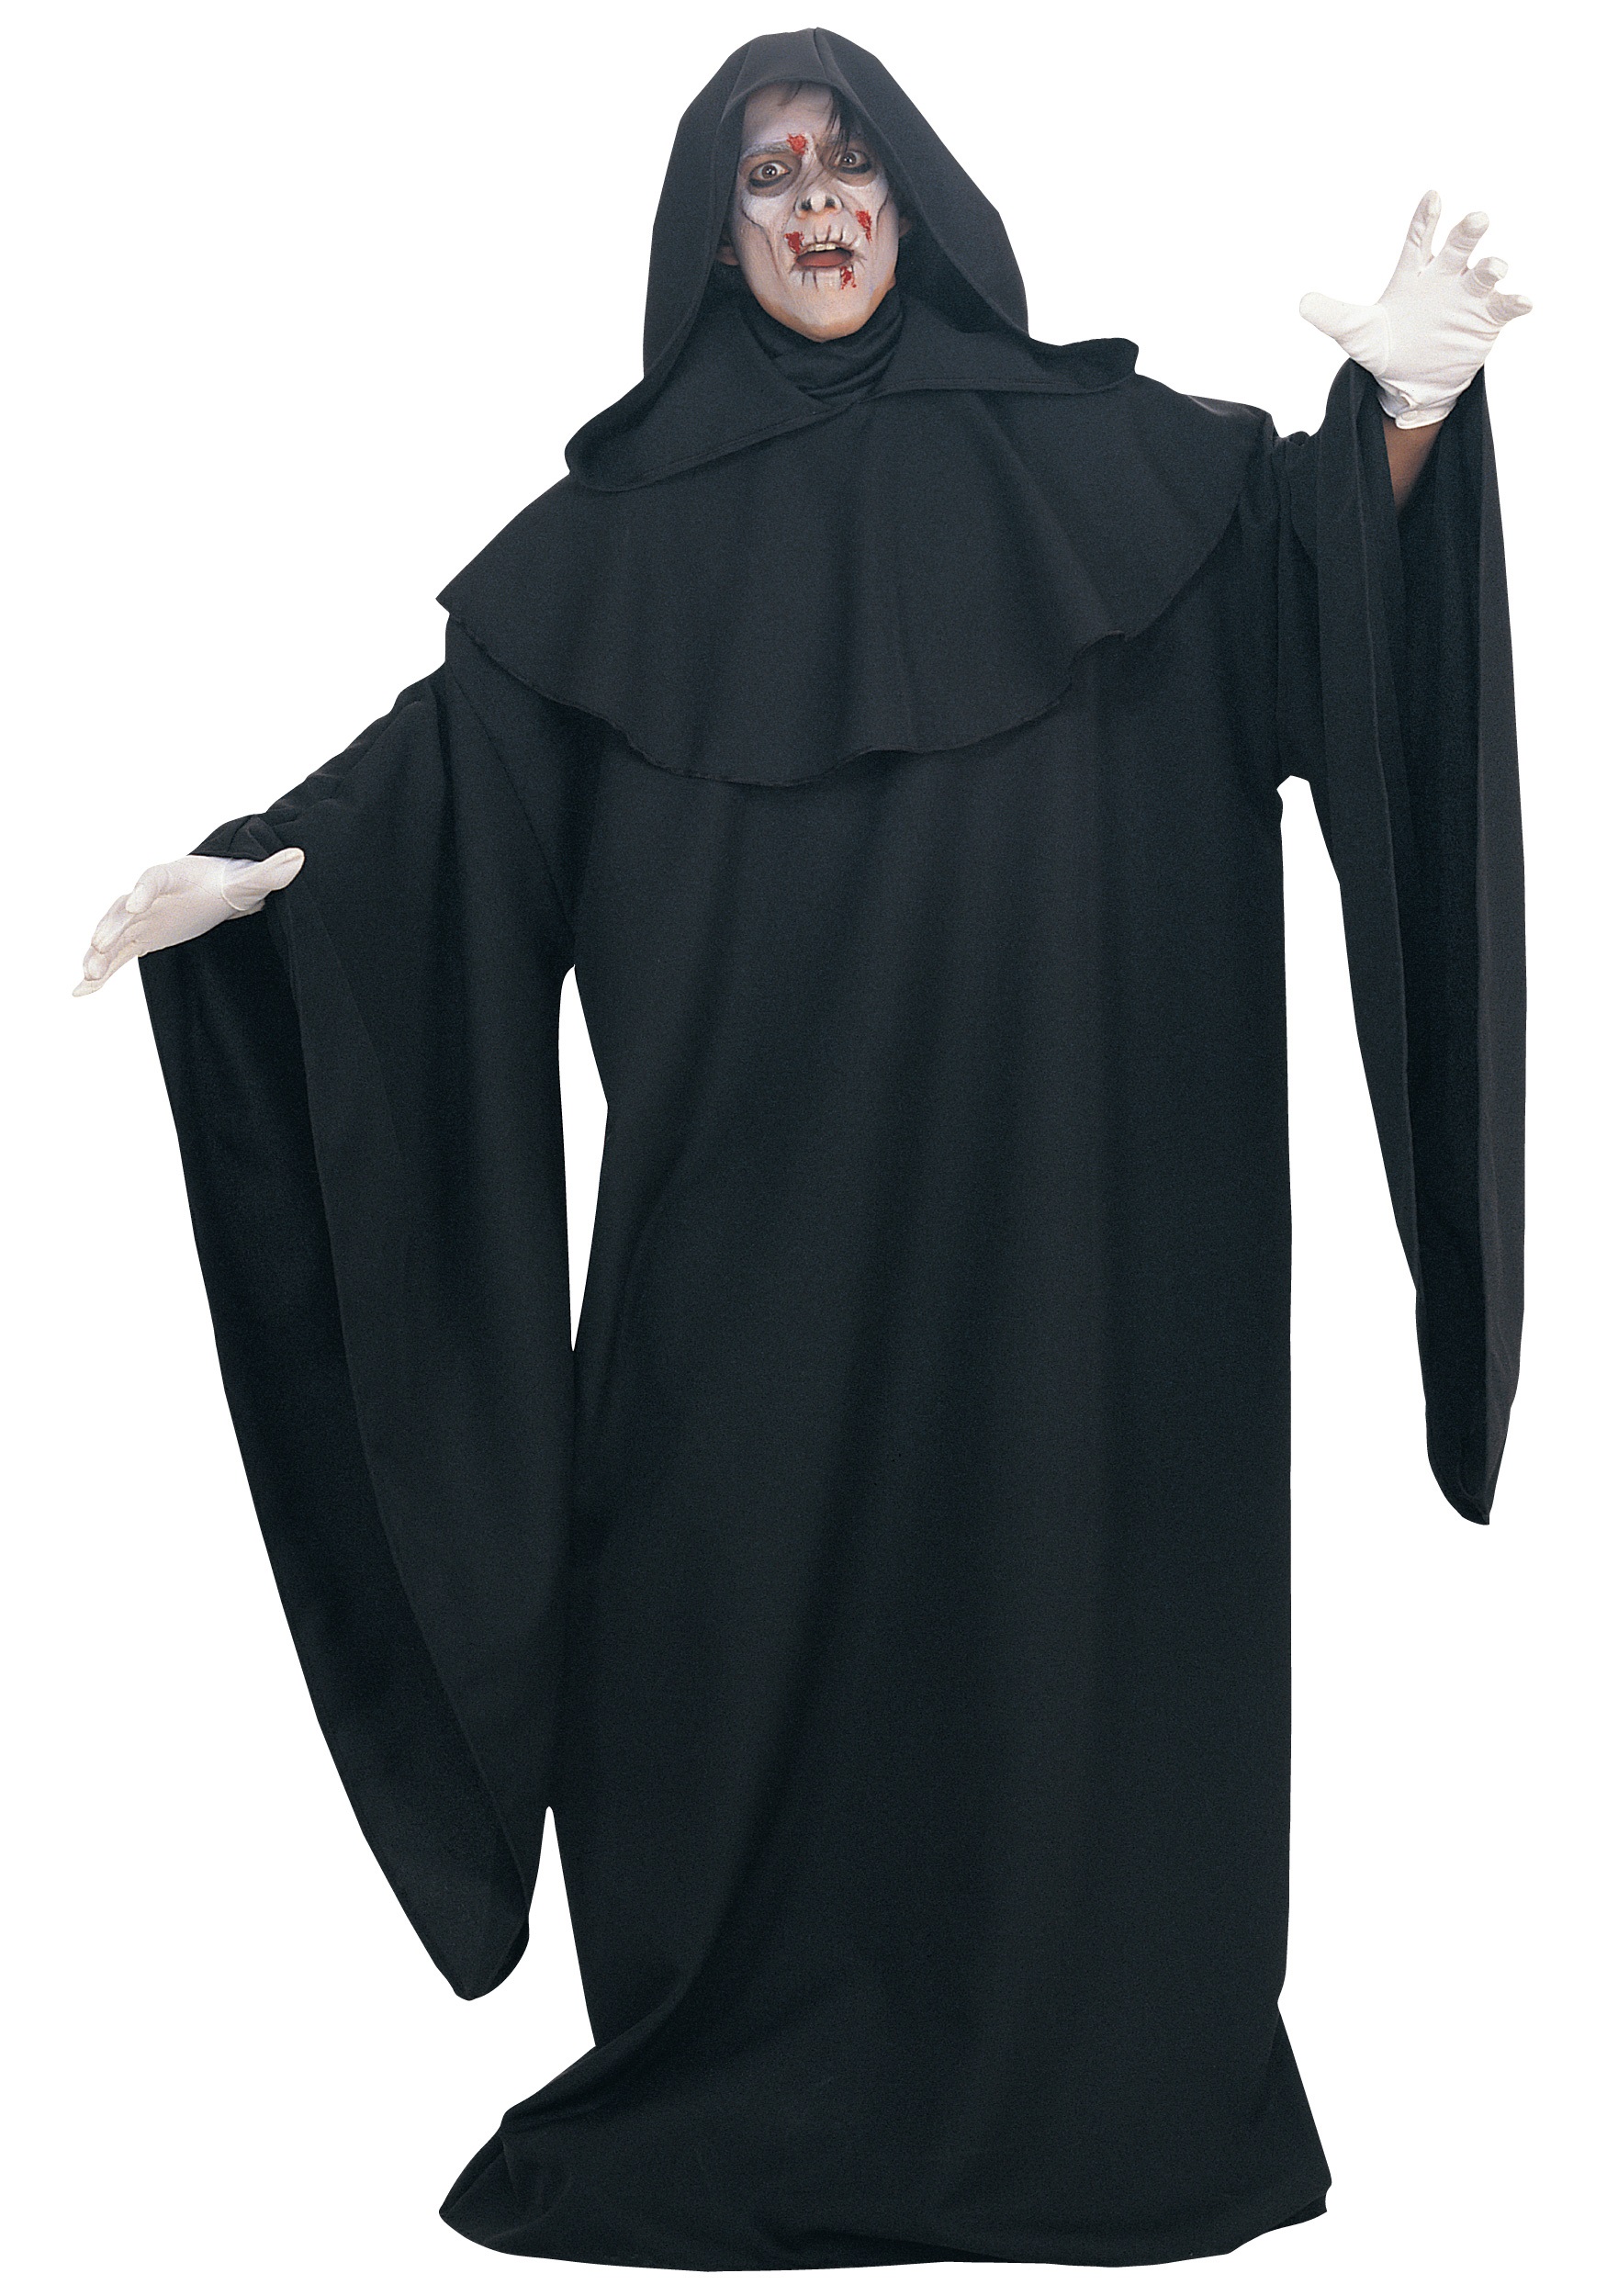 https://images.halloweencostumes.eu/products/8517/1-1/deluxe-robe.jpg